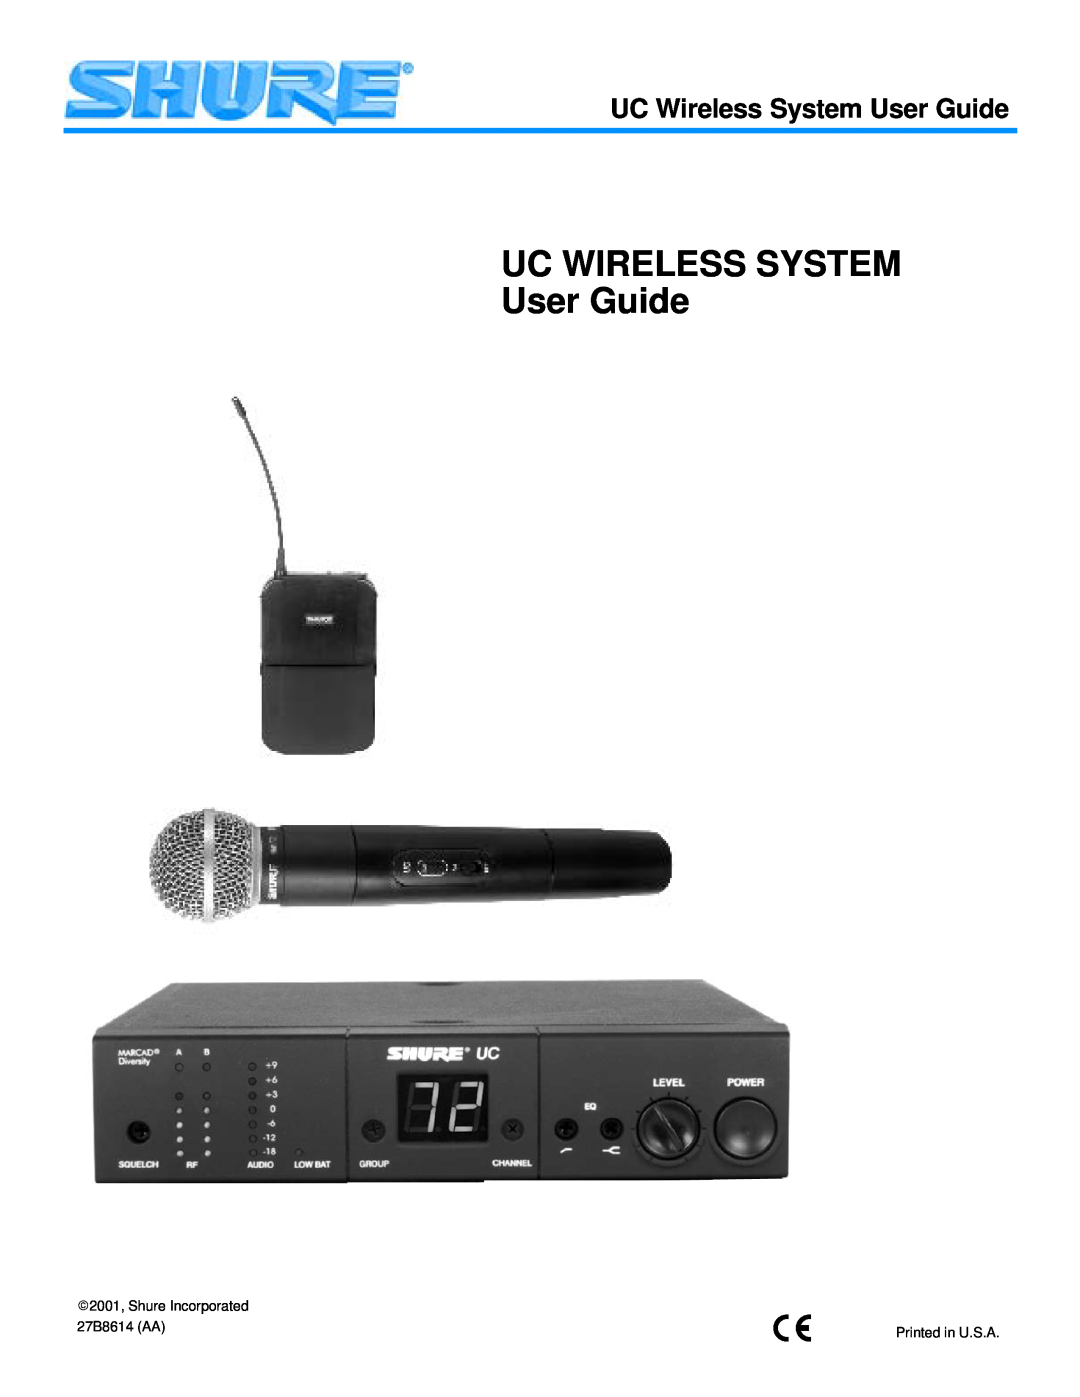 Shure manual UC WIRELESS SYSTEM User Guide, UC Wireless System User Guide, 2001, Shure Incorporated, 27B8614 AA 